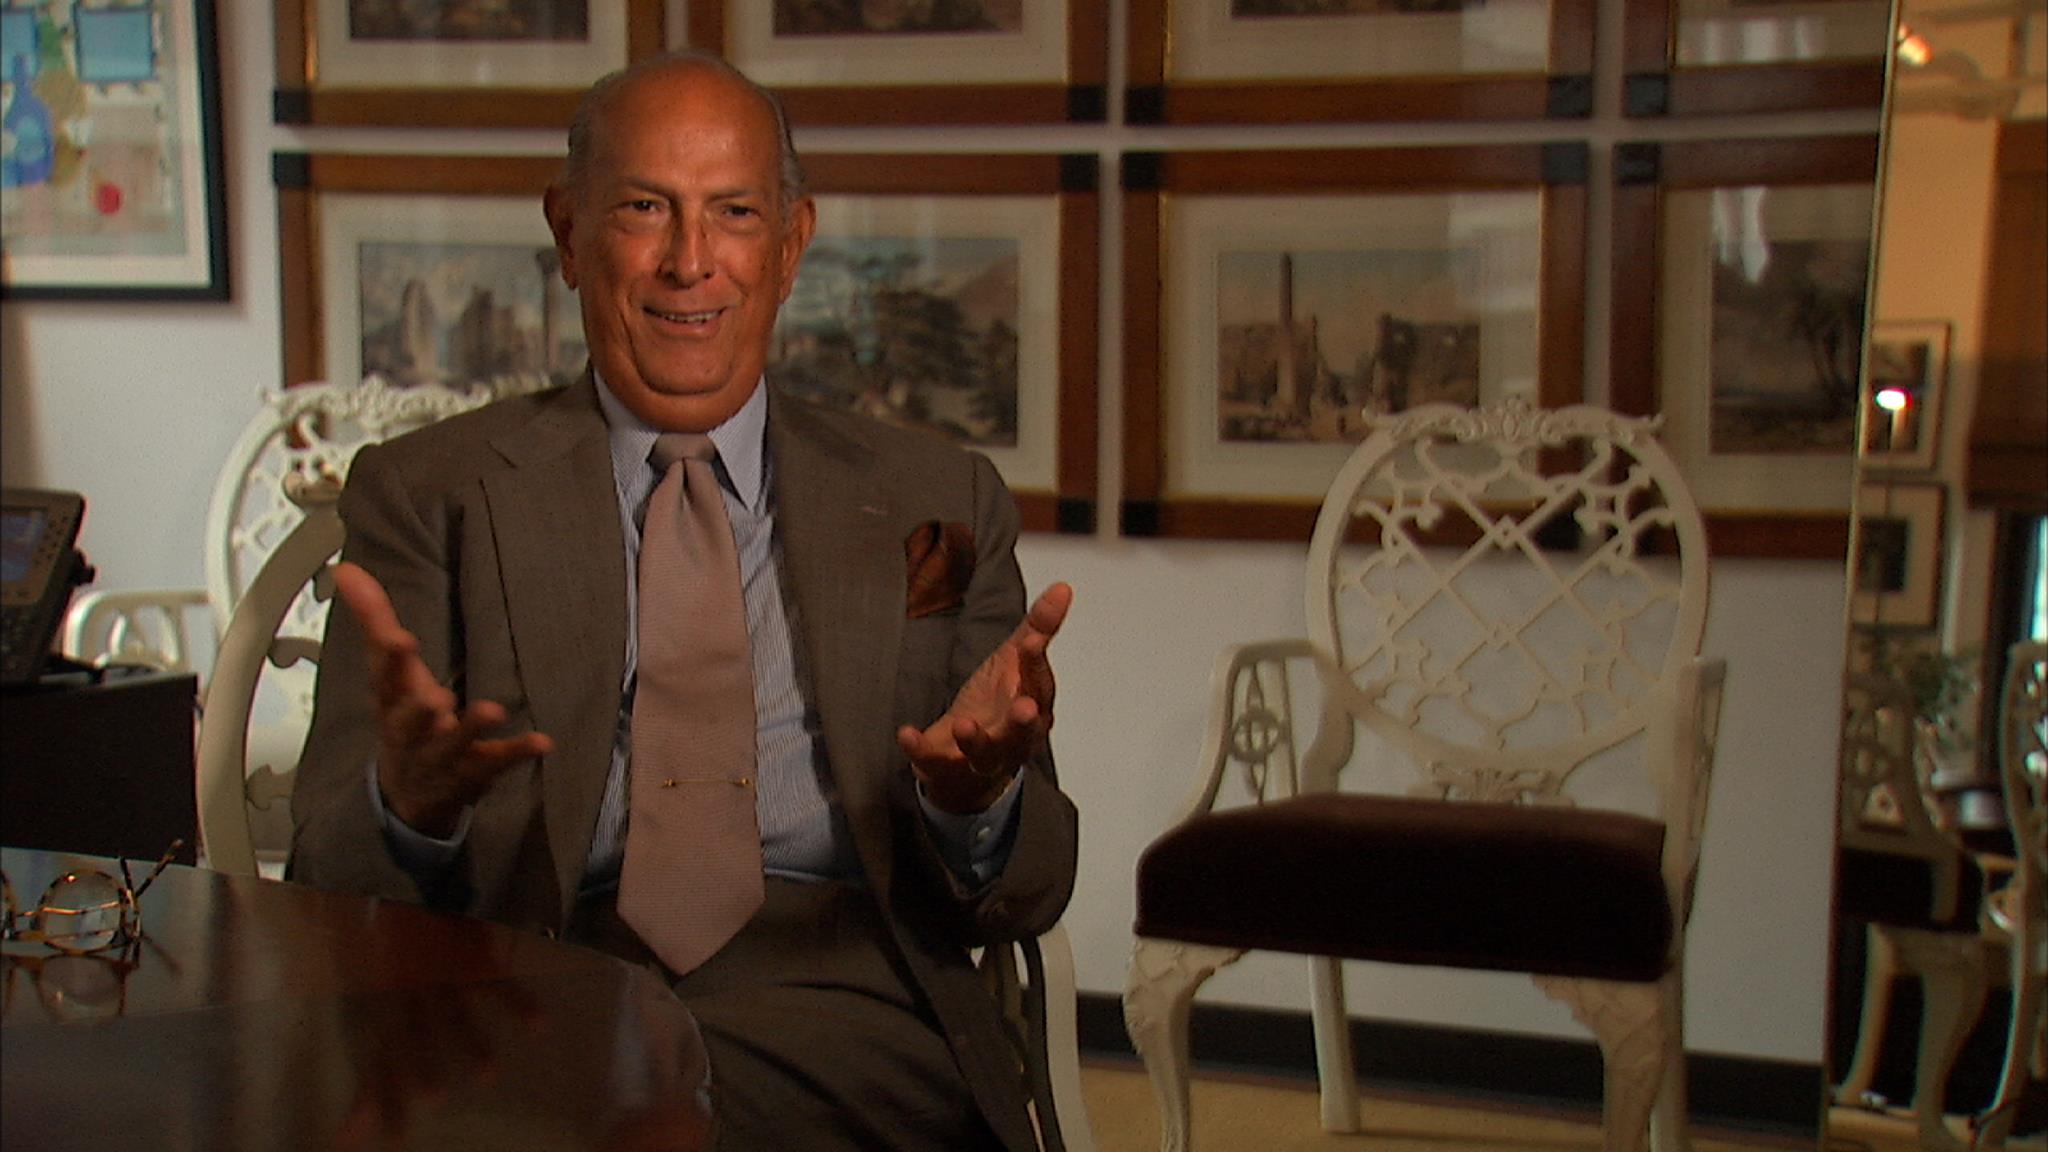  &quot;My only regret is that there is only one Bergdorf Goodman.&quot; -Oscar de la Renta